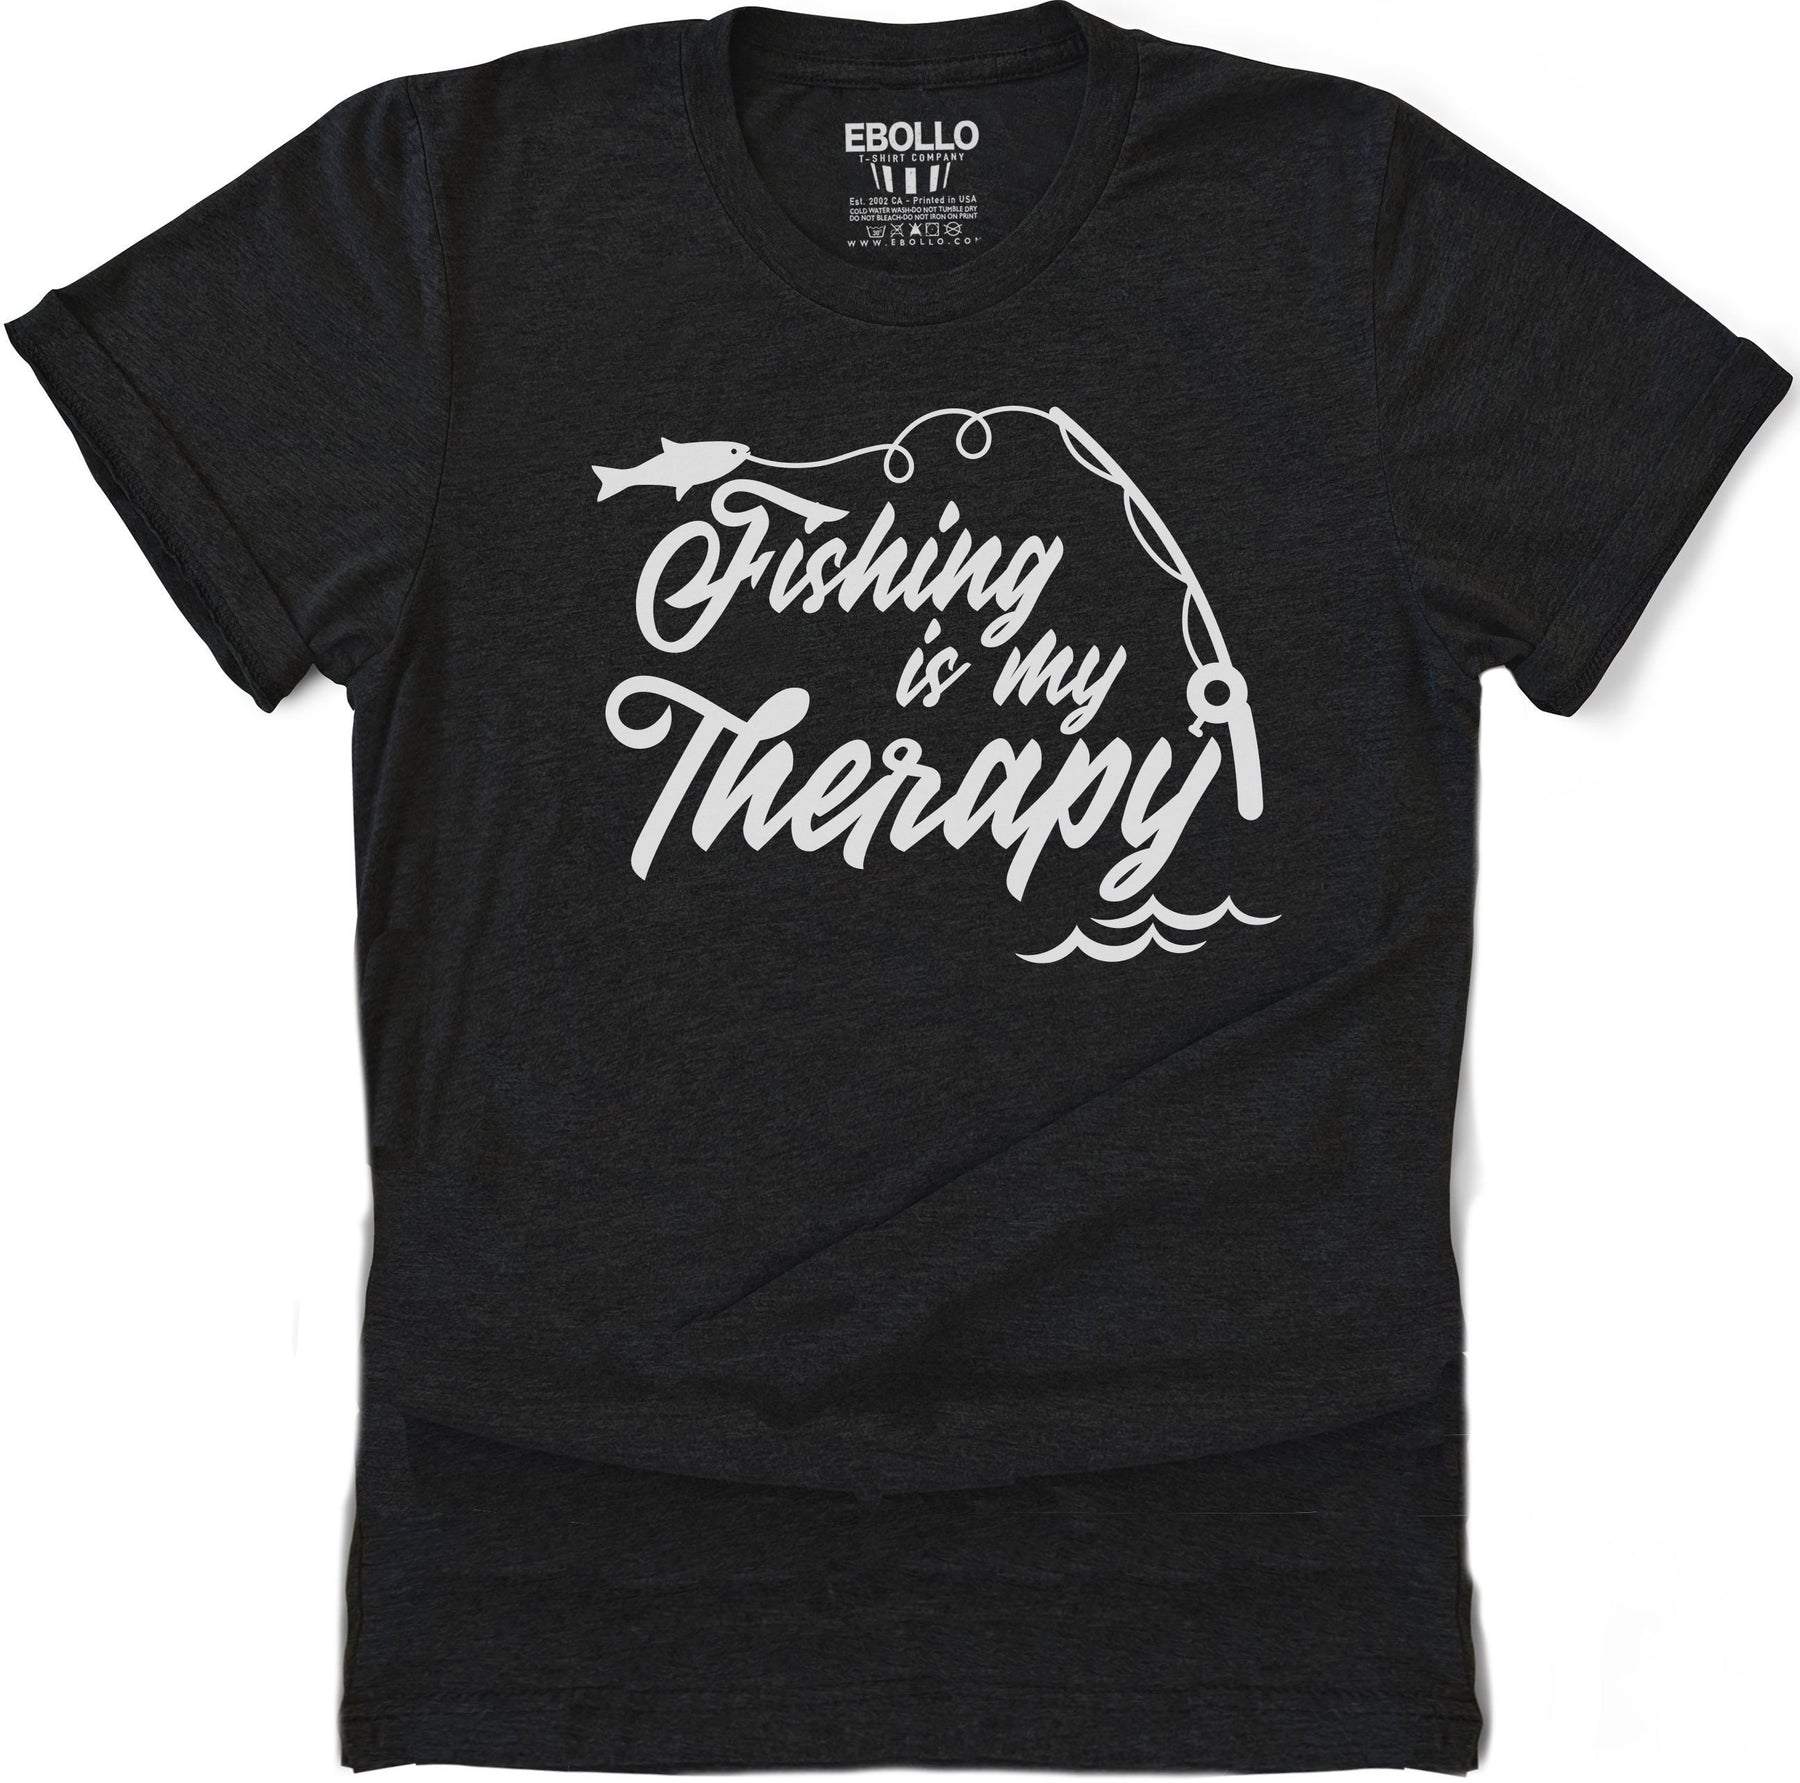 Fishing is My Therapy Shirt  Funny Fishing Shirt - Fathers Day